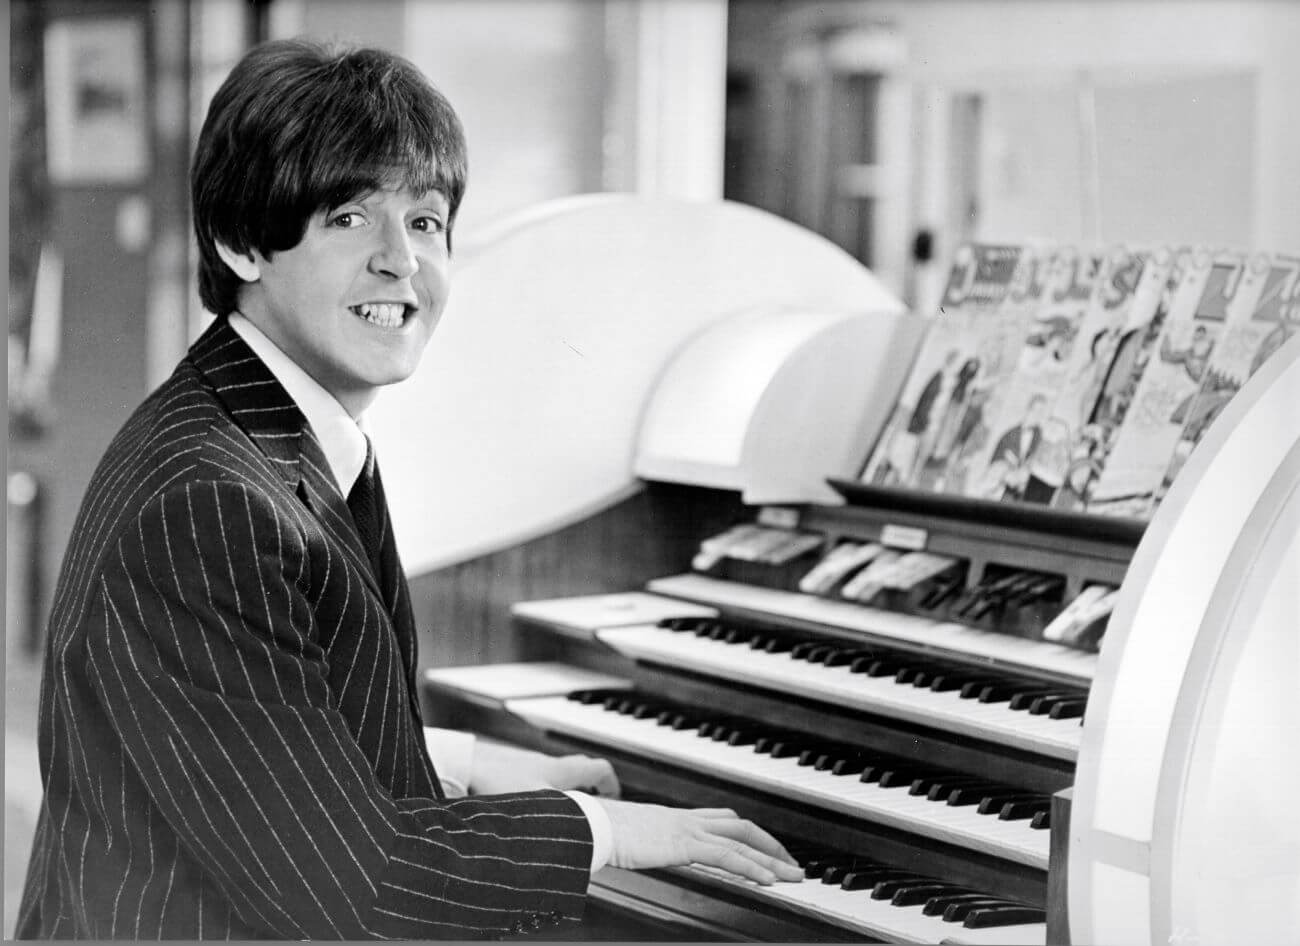 A black and white picture of Paul McCartney sitting at a piano, one of the many instruments he plays.